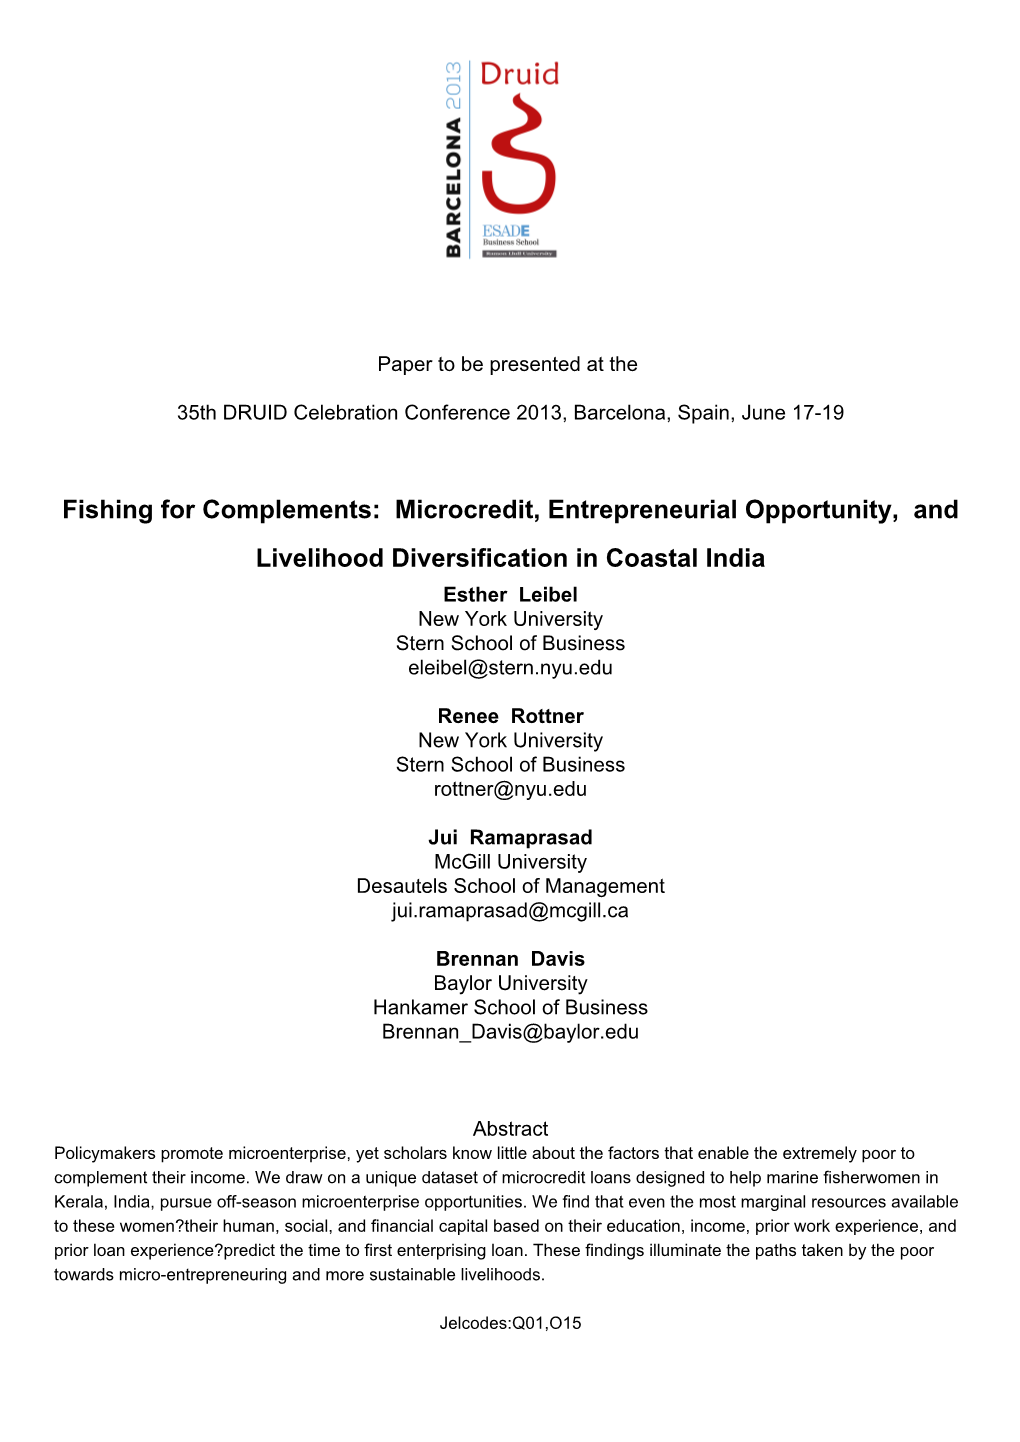 Fishing for Complements: Microcredit, Entrepreneurial Opportunity, and Livelihood Diversification in Coastal India